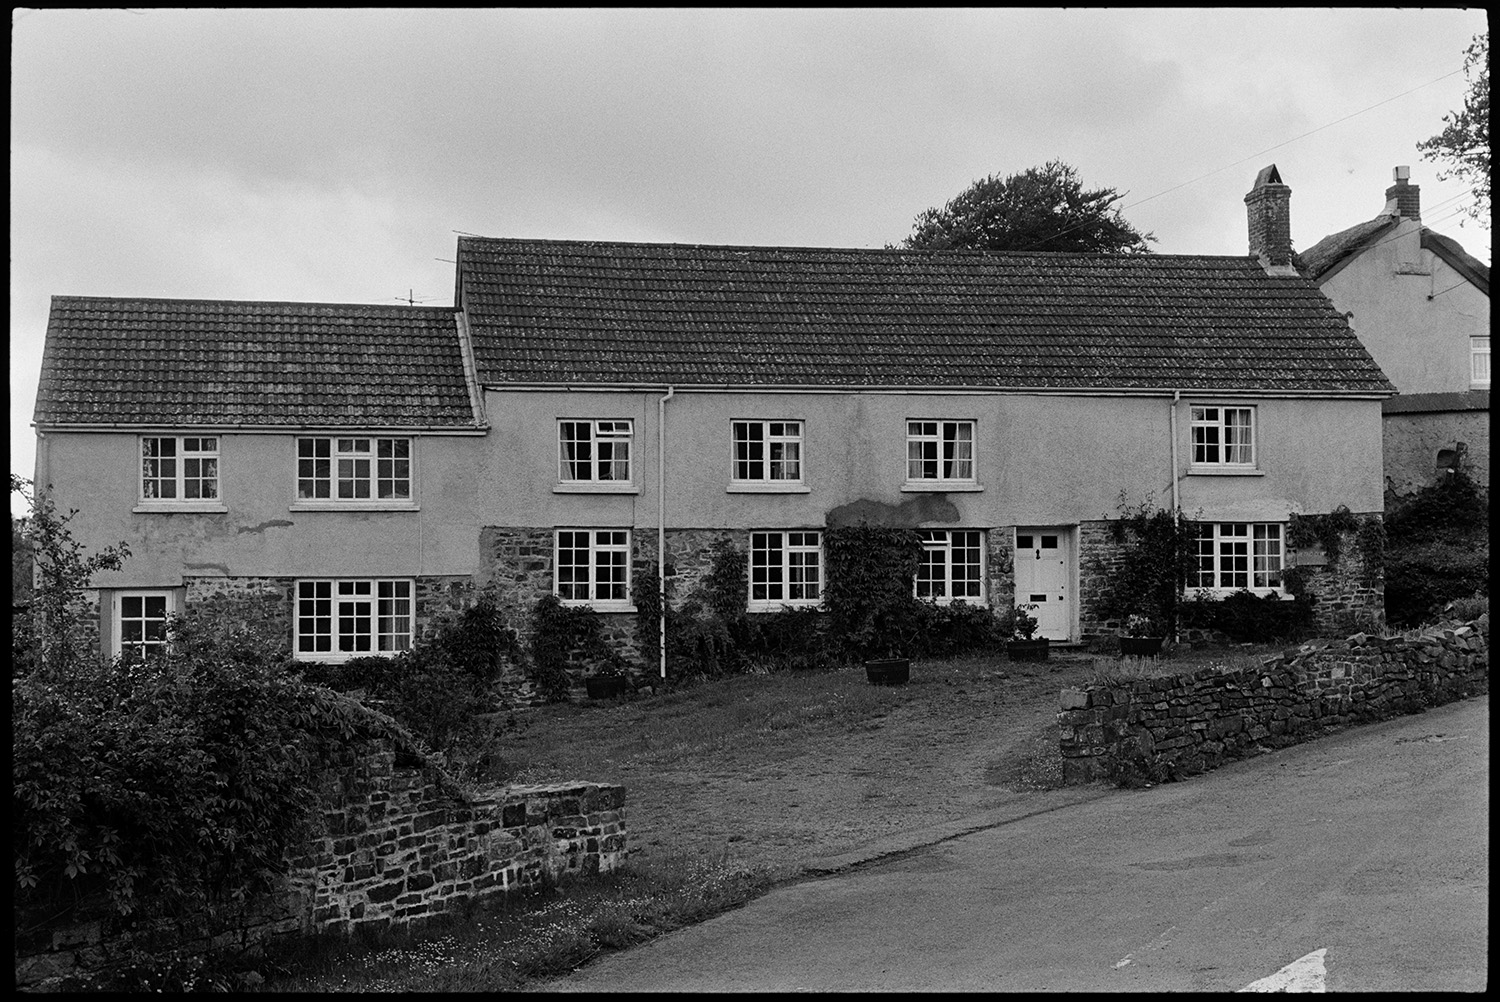 Village and farm, comparison with old photo.
[A house in Meshaw, which has been modernised.]